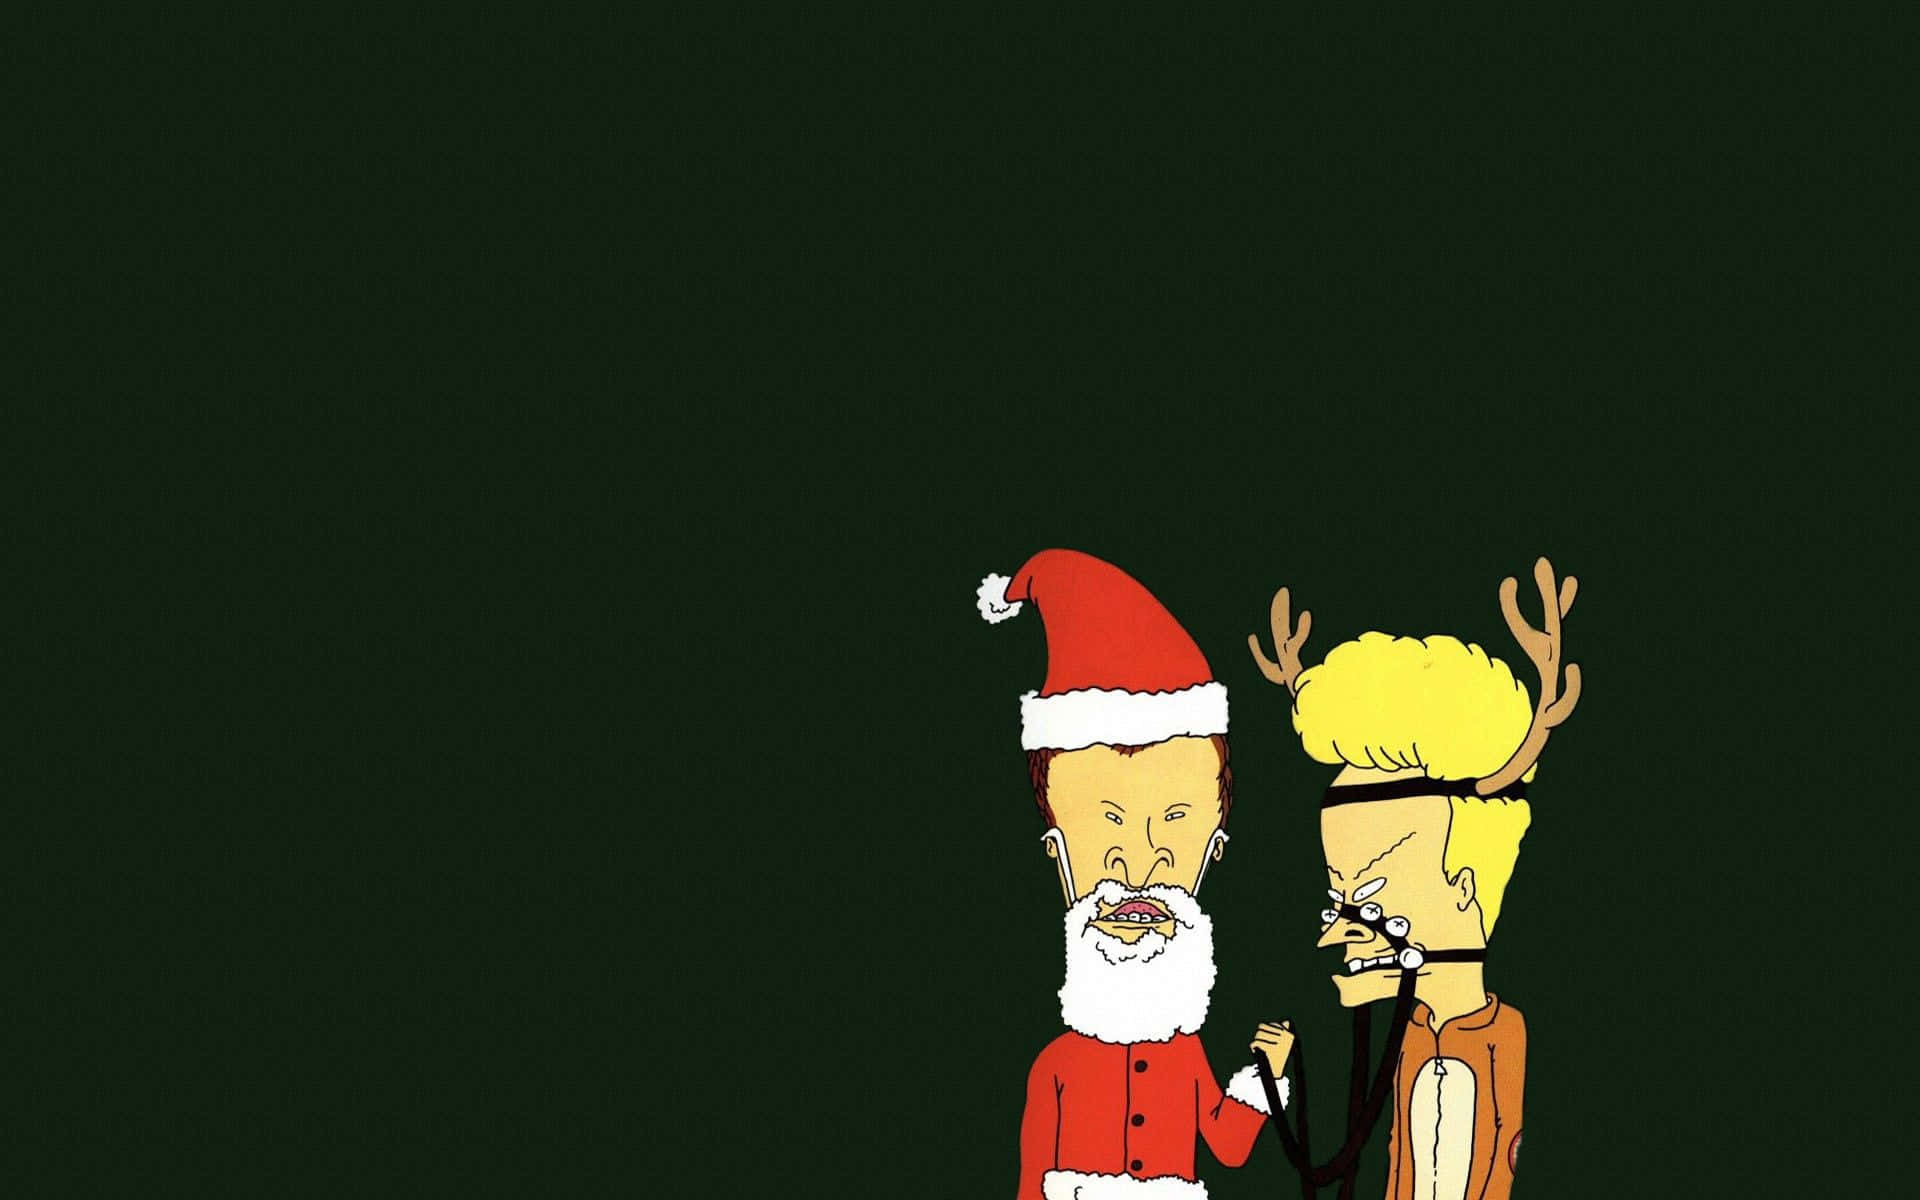 A Cartoon Image Of Santa Claus And A Man With A Reindeer